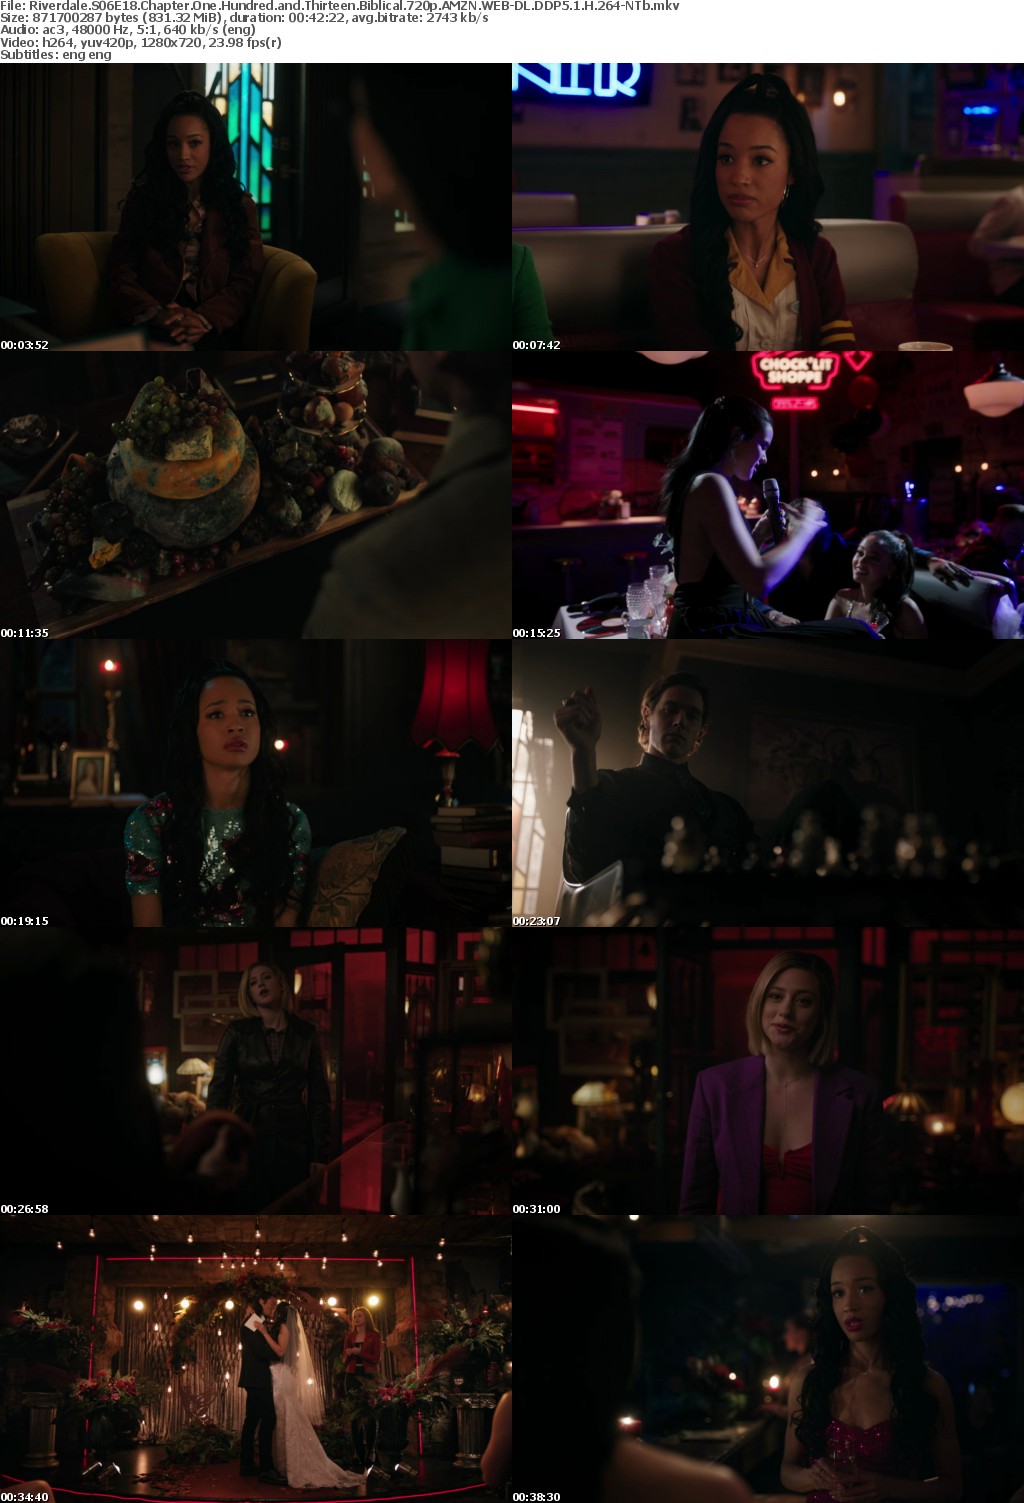 Riverdale US S06E18 Chapter One Hundred and Thirteen Biblical 720p AMZN WEBRip DDP5 1 x264-NTb